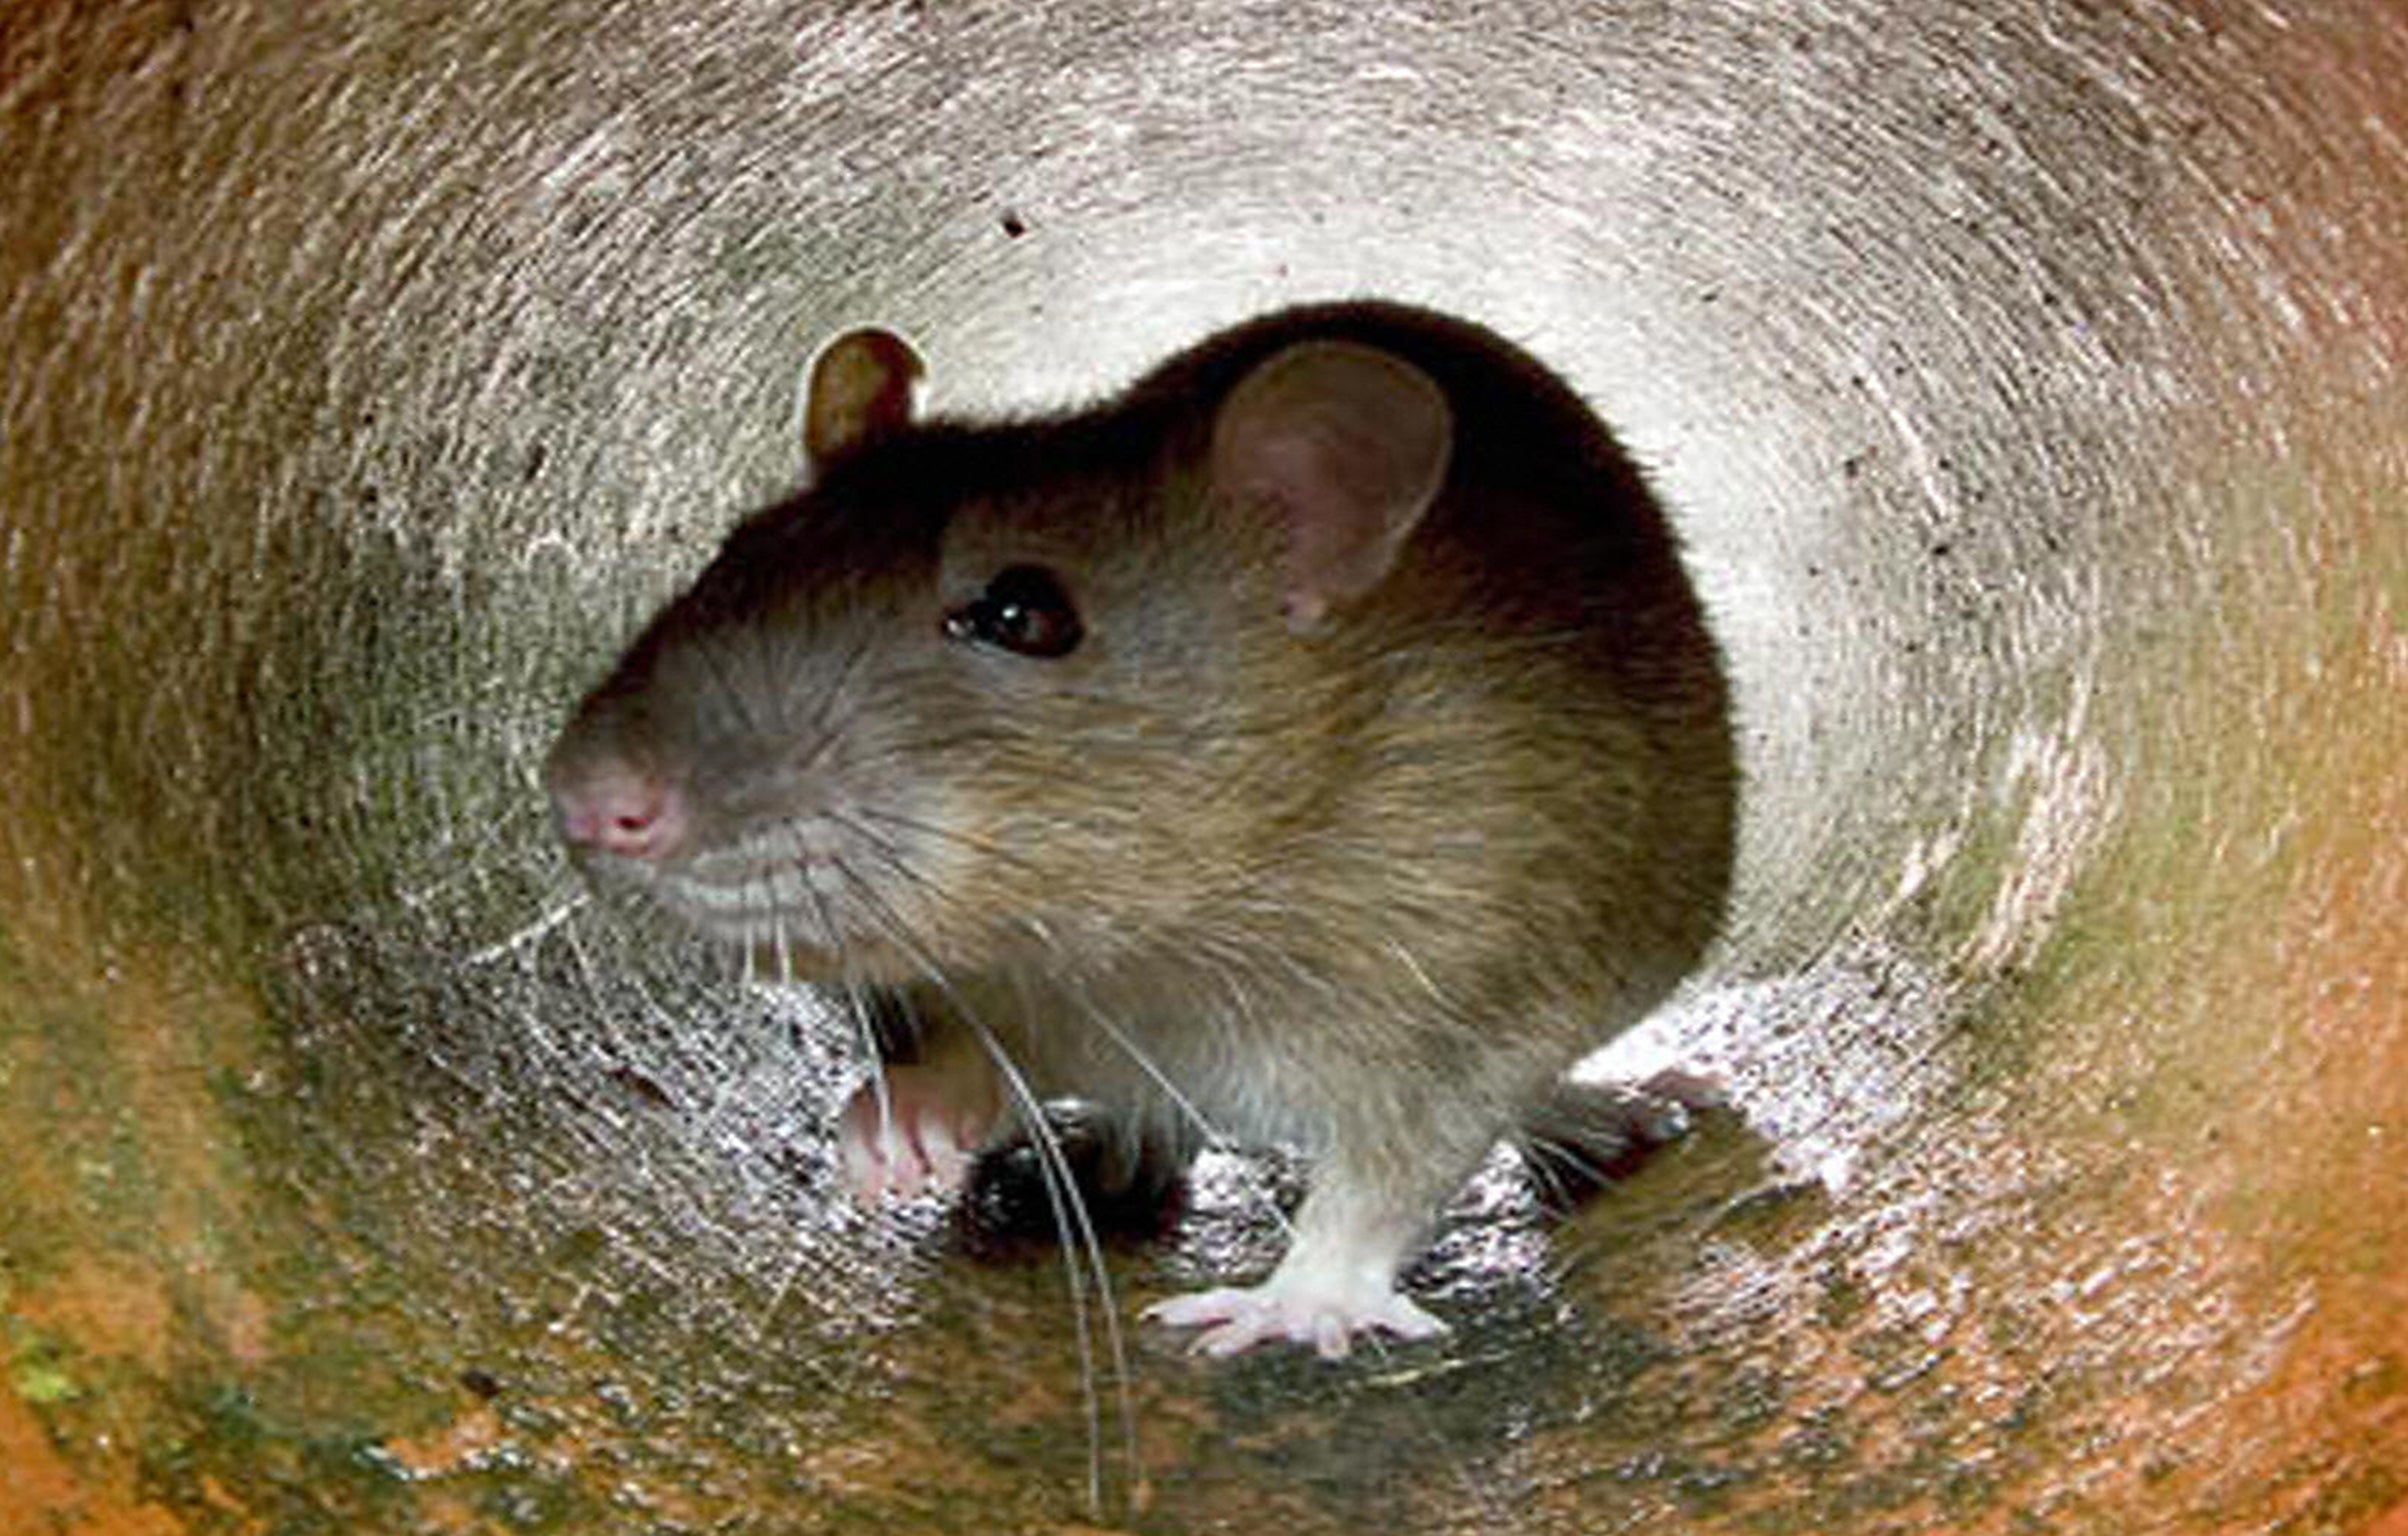 Rats were among a number of creatures found in NHS hospitals